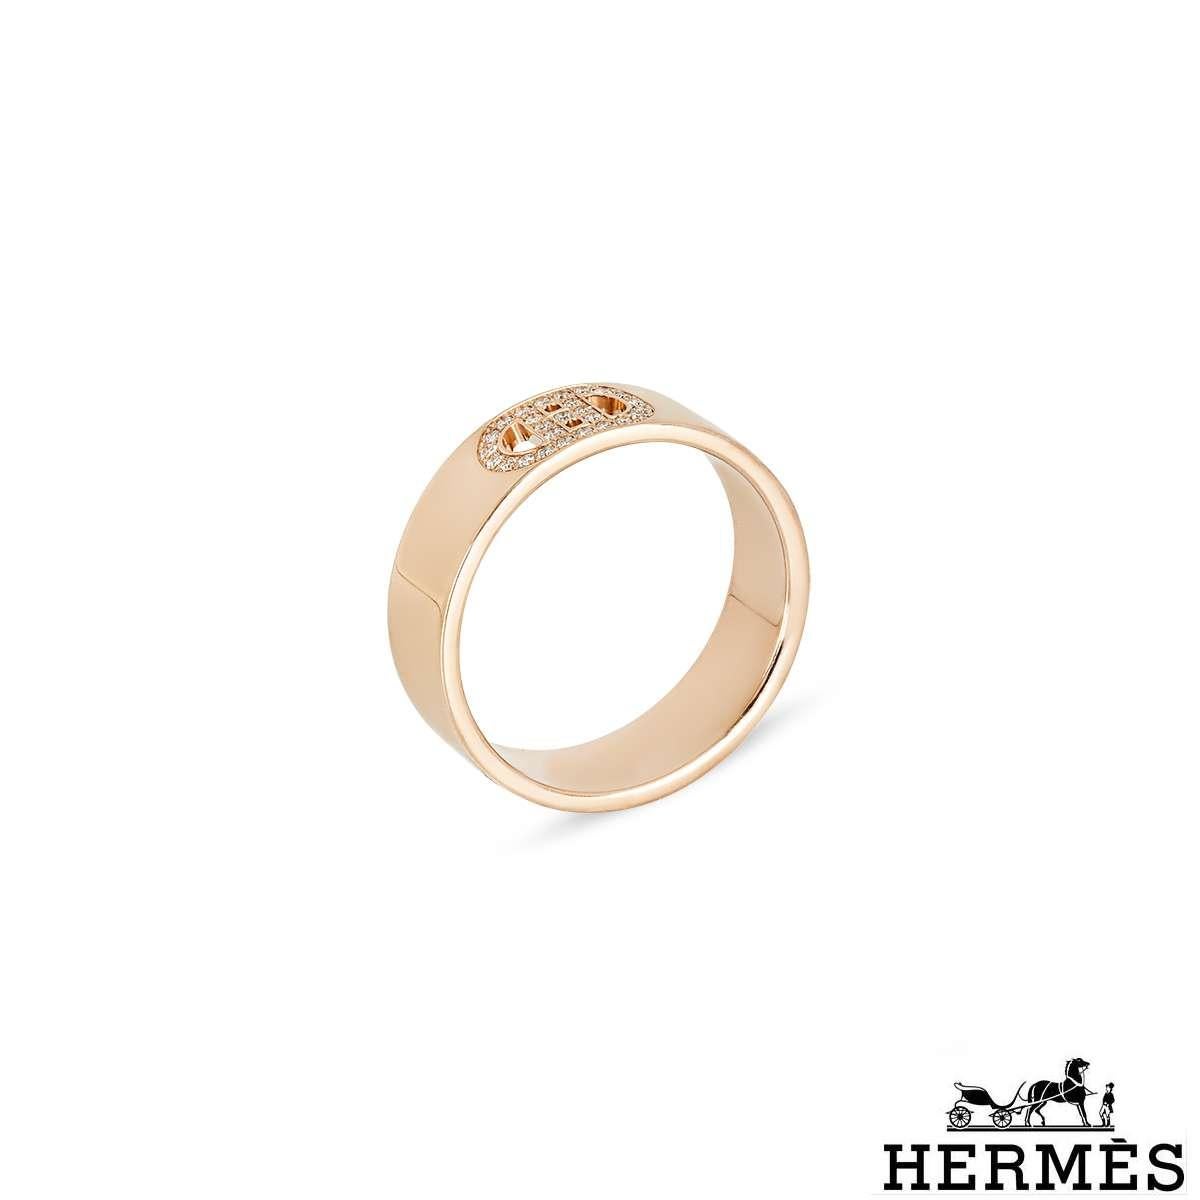 An 18k rose gold diamond ring by Hermes from the H d'Ancre collection. The ring is set with the iconic 'H' buckle motif pave set with 27 round brilliant cut diamonds with a weight of 0.07ct. The ring measures 5mm in width and is a size UK L - EU 51